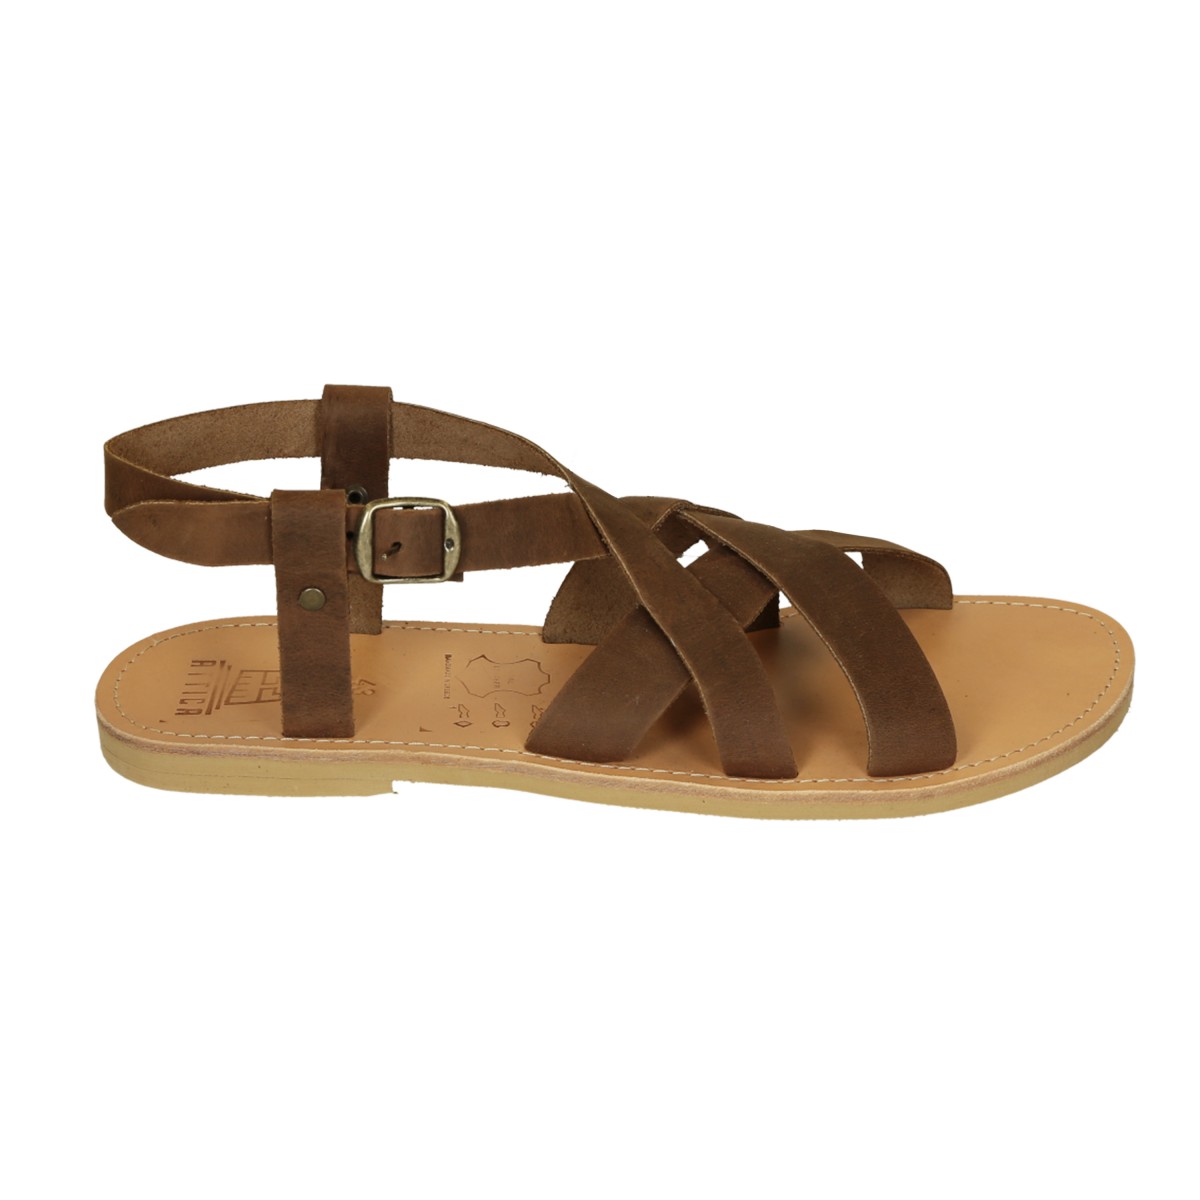 Men's handmade thong sandals in brown nubuck leather | The leather ...